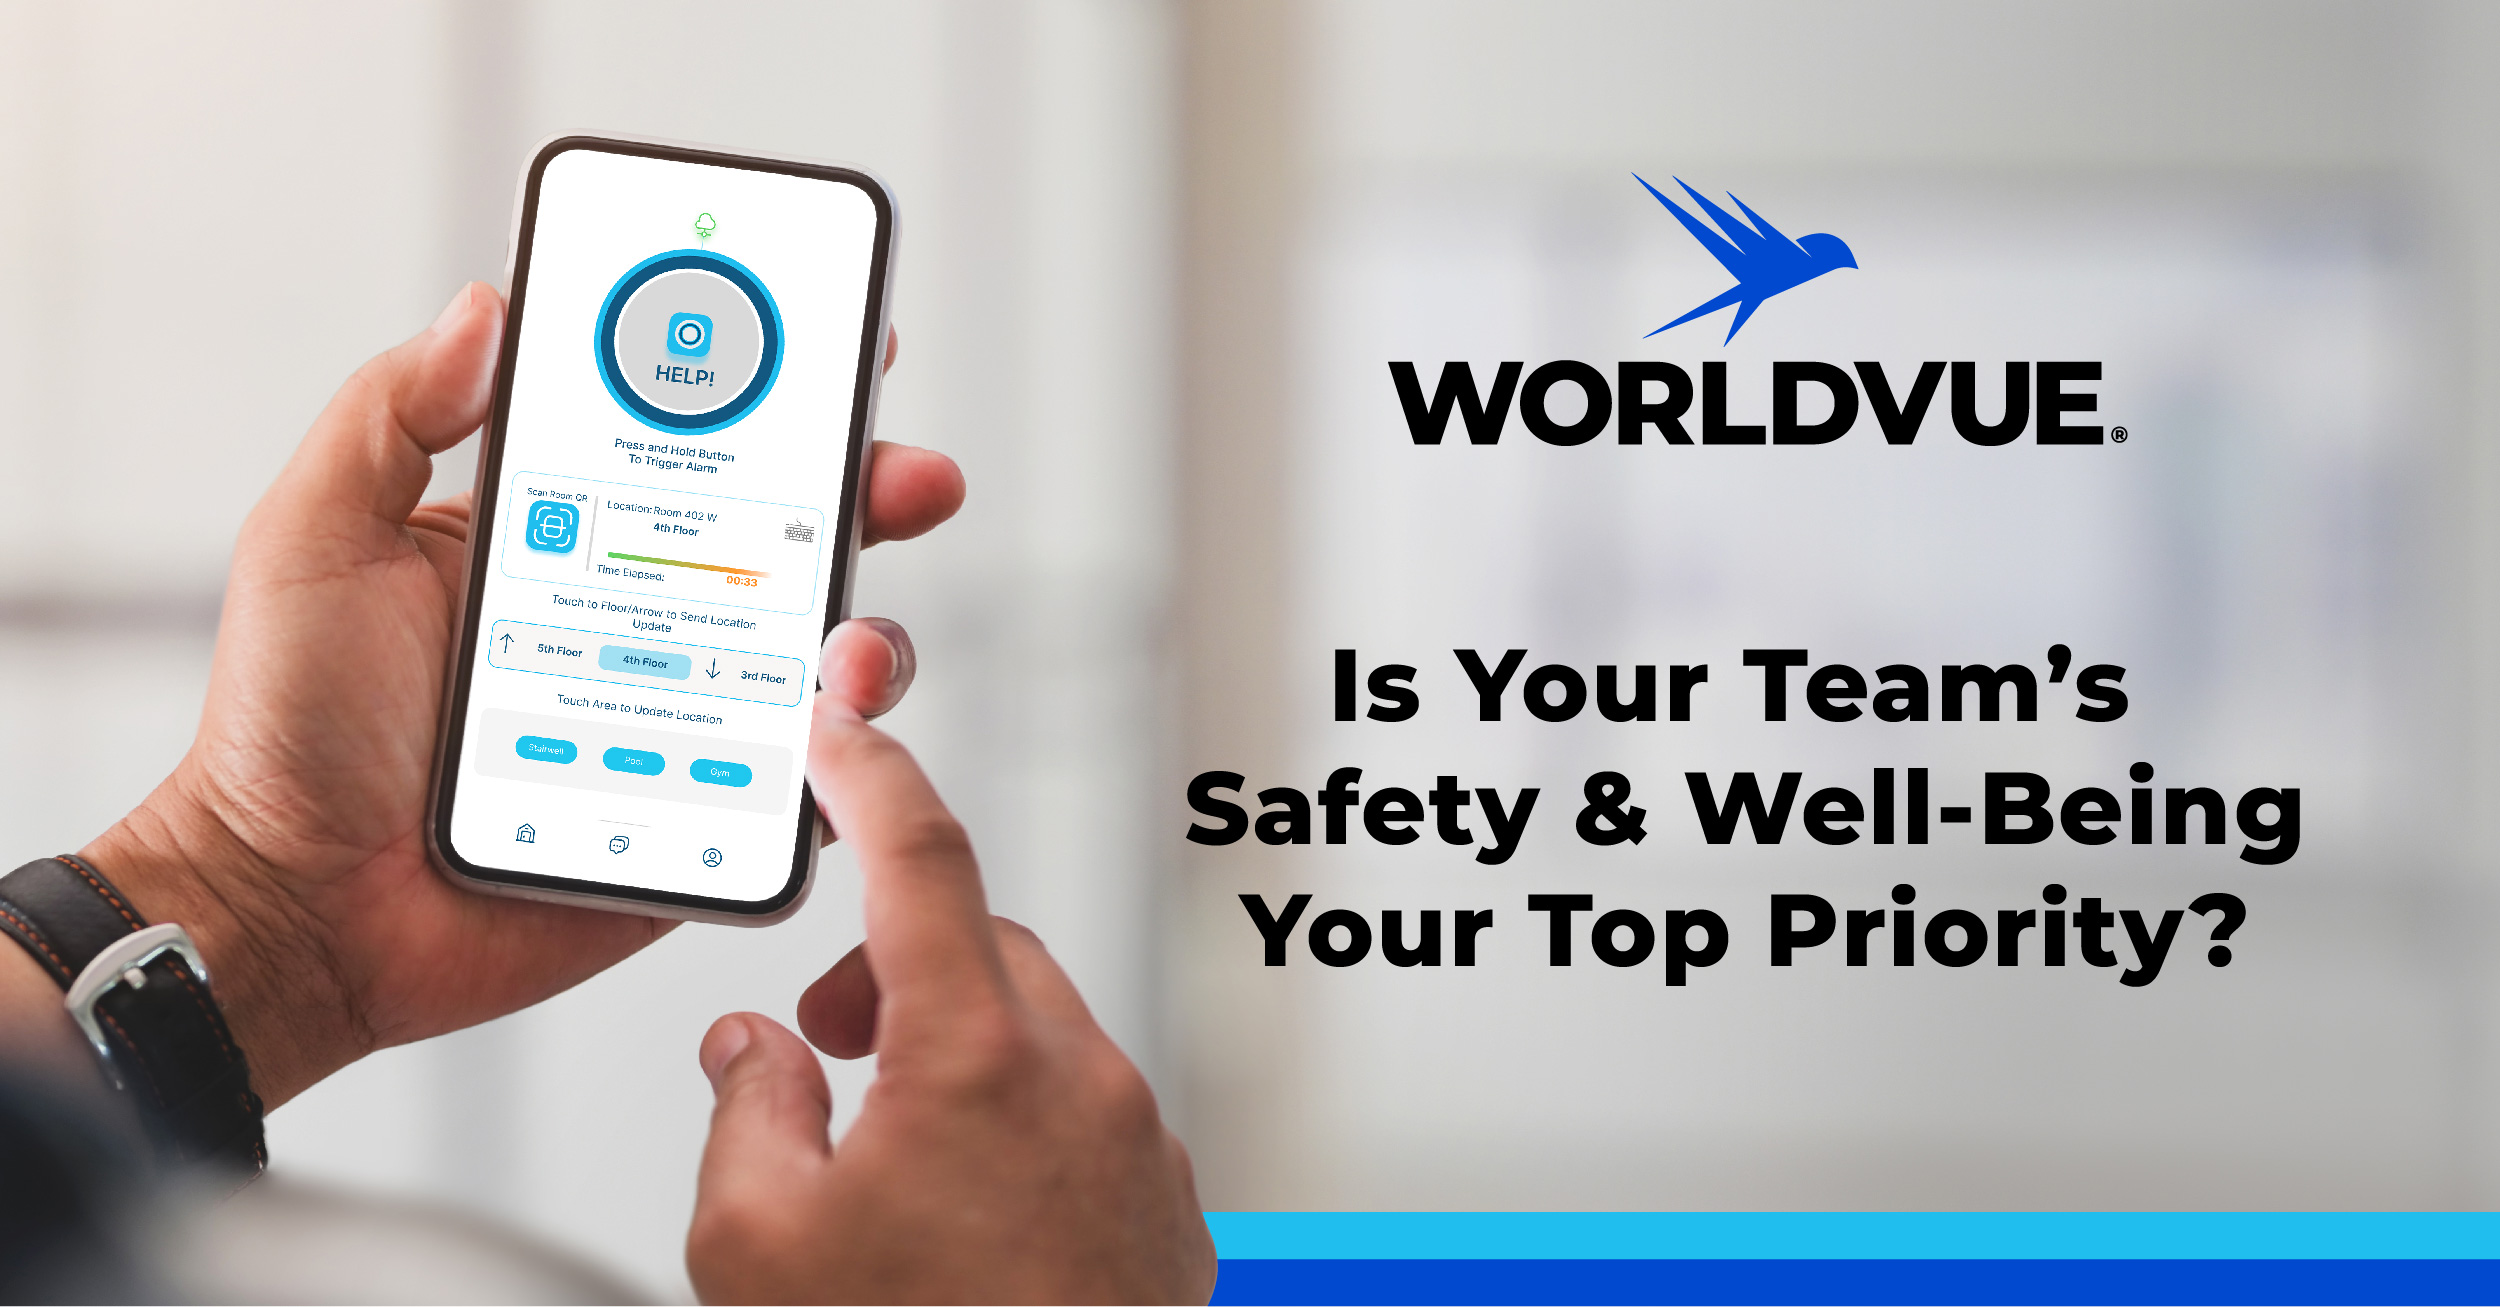 hand holding phone showing ProSafe solution, with WorldVue logo and text saying "Is Your Team’s Safety and Well-Being Your Top Priority?"